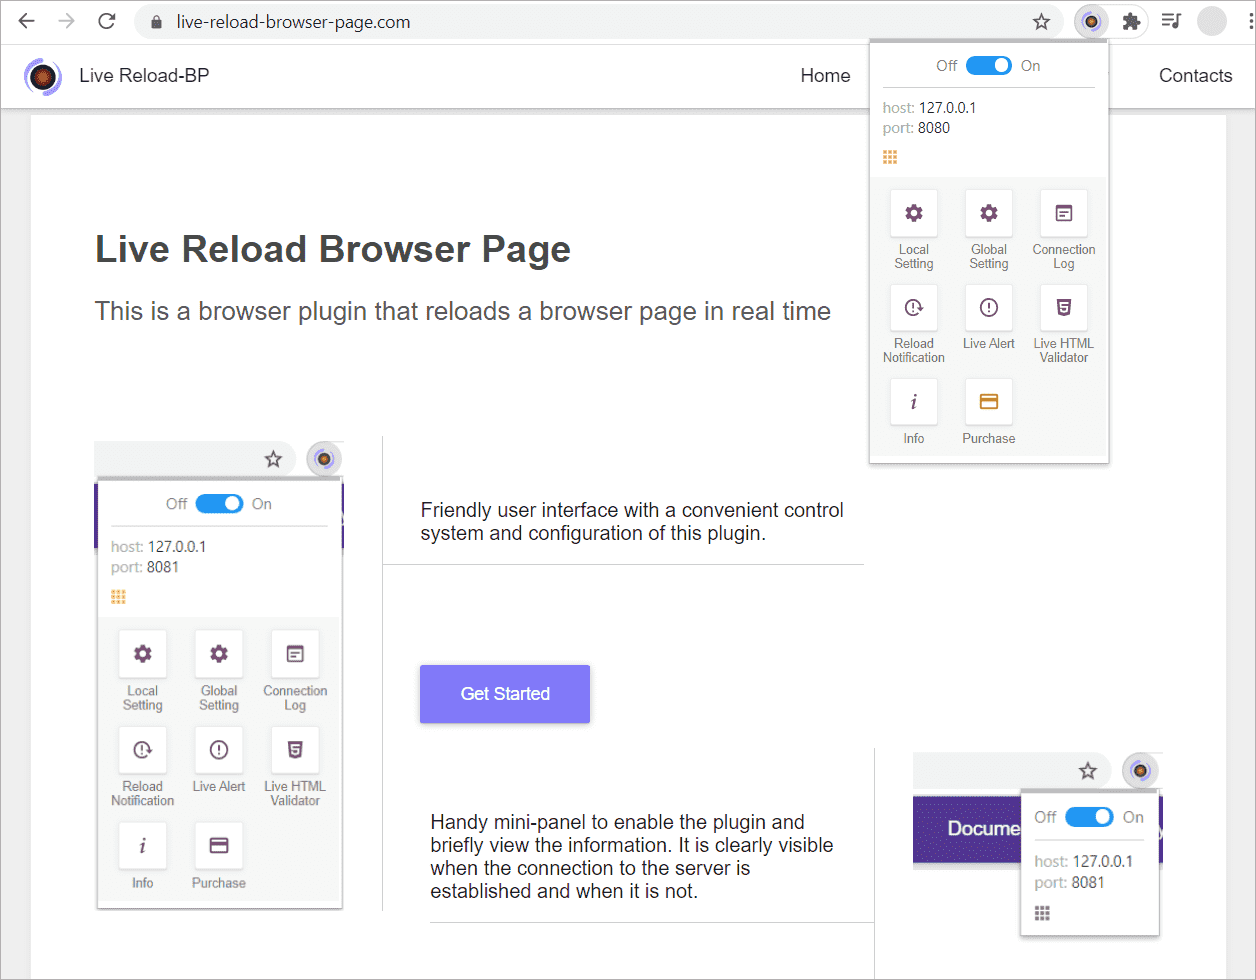 Live Reload Browser Page